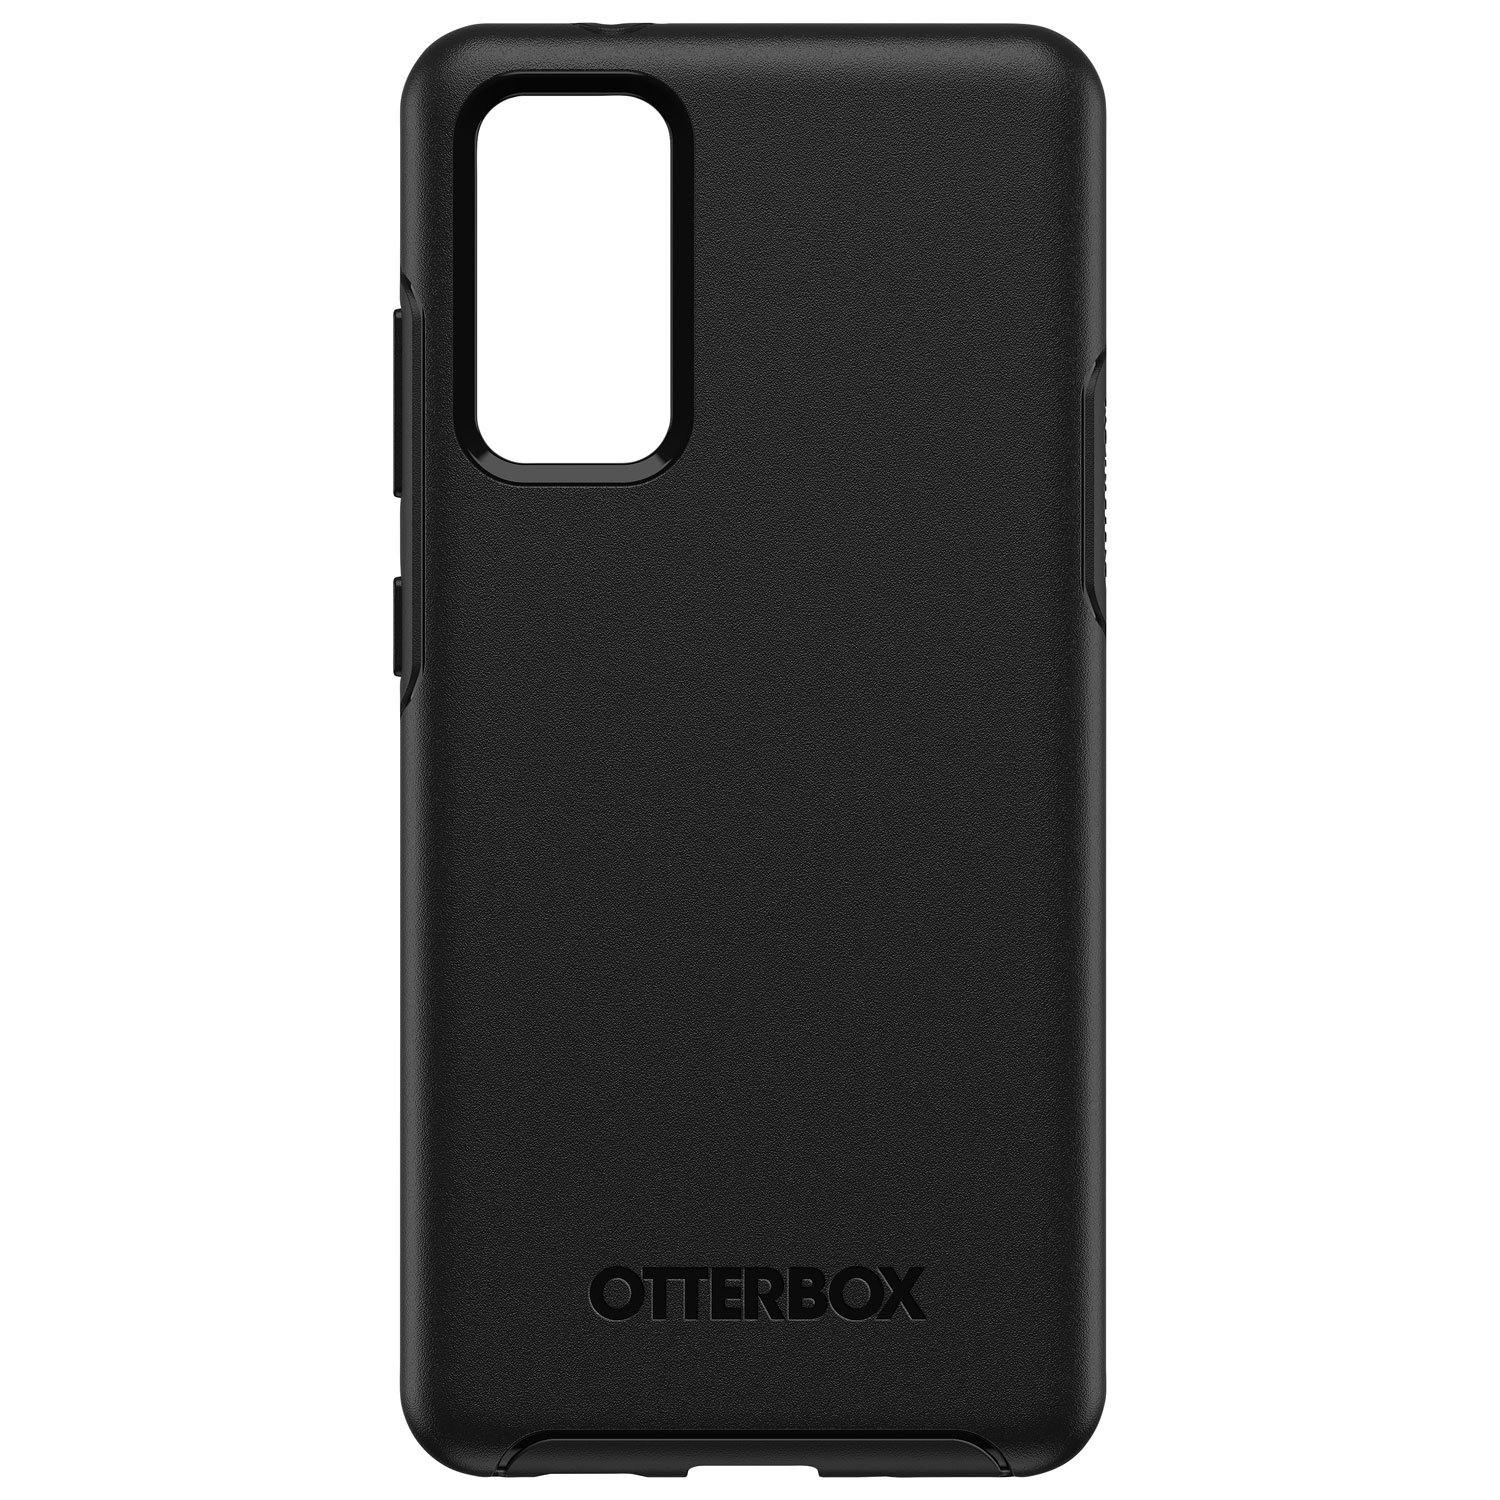 OtterBox Symmetry Fitted Hard Shell Case for Samsung Galaxy S20 FE - Black